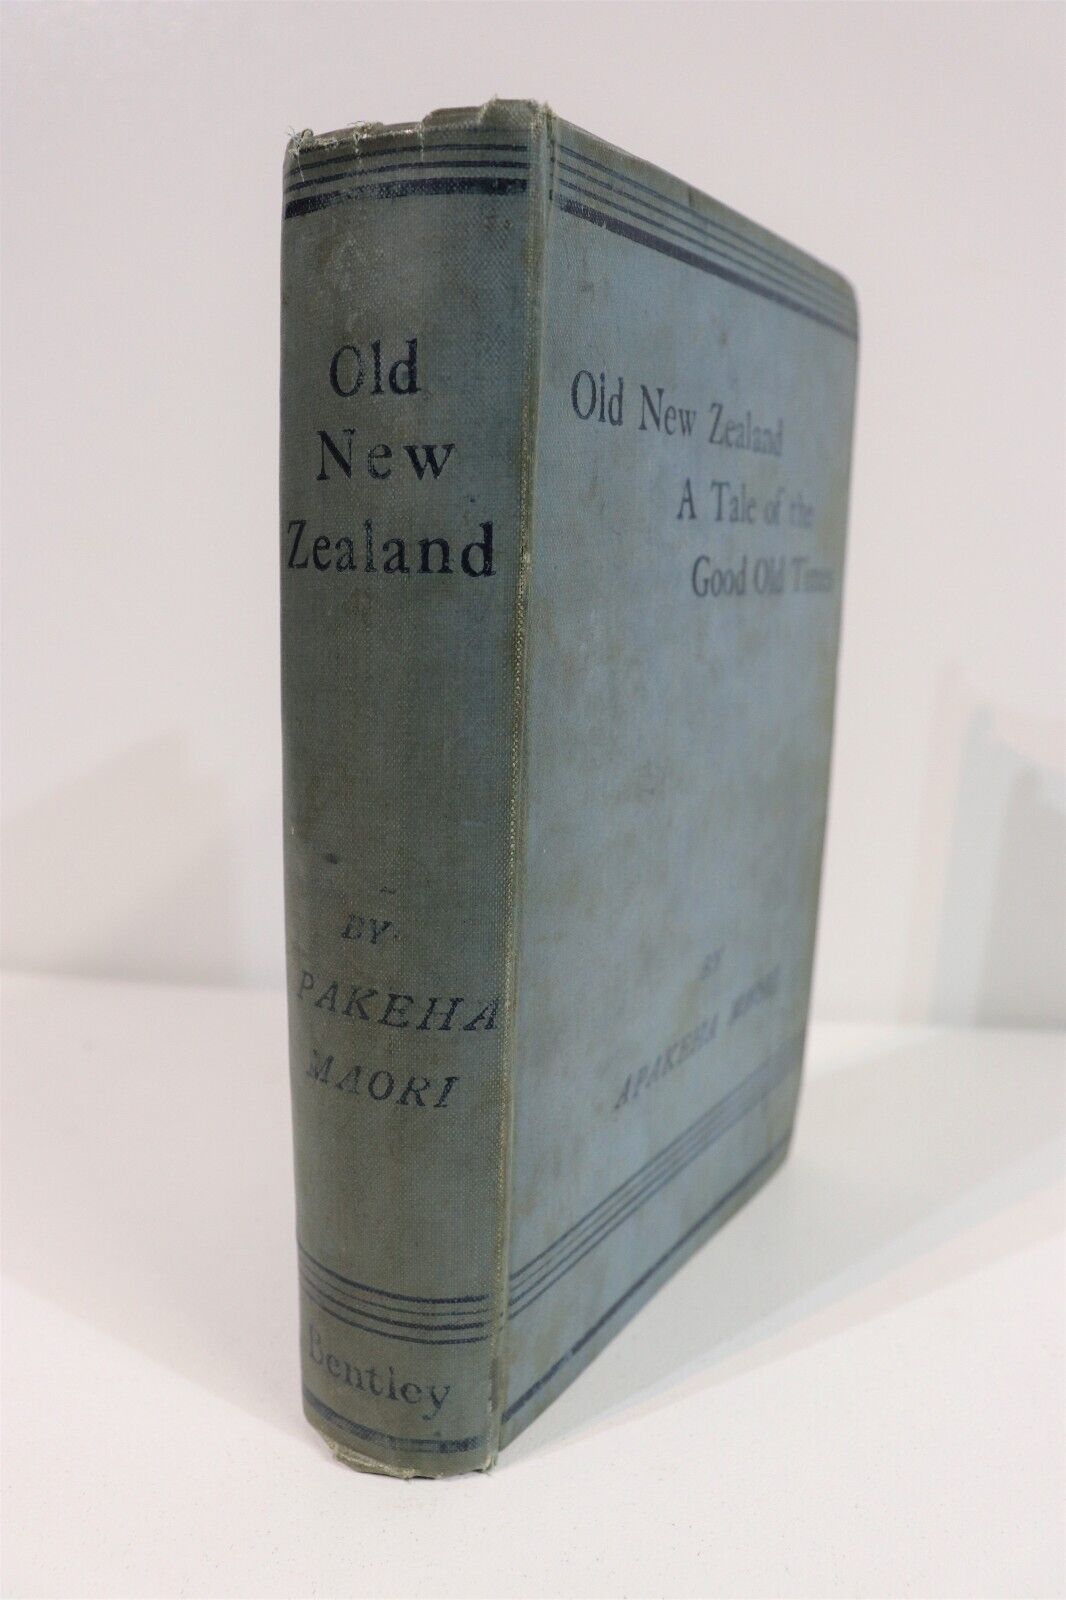 Old New Zealand by Pakeha Maori - 1887 - Antique New Zealand History Book